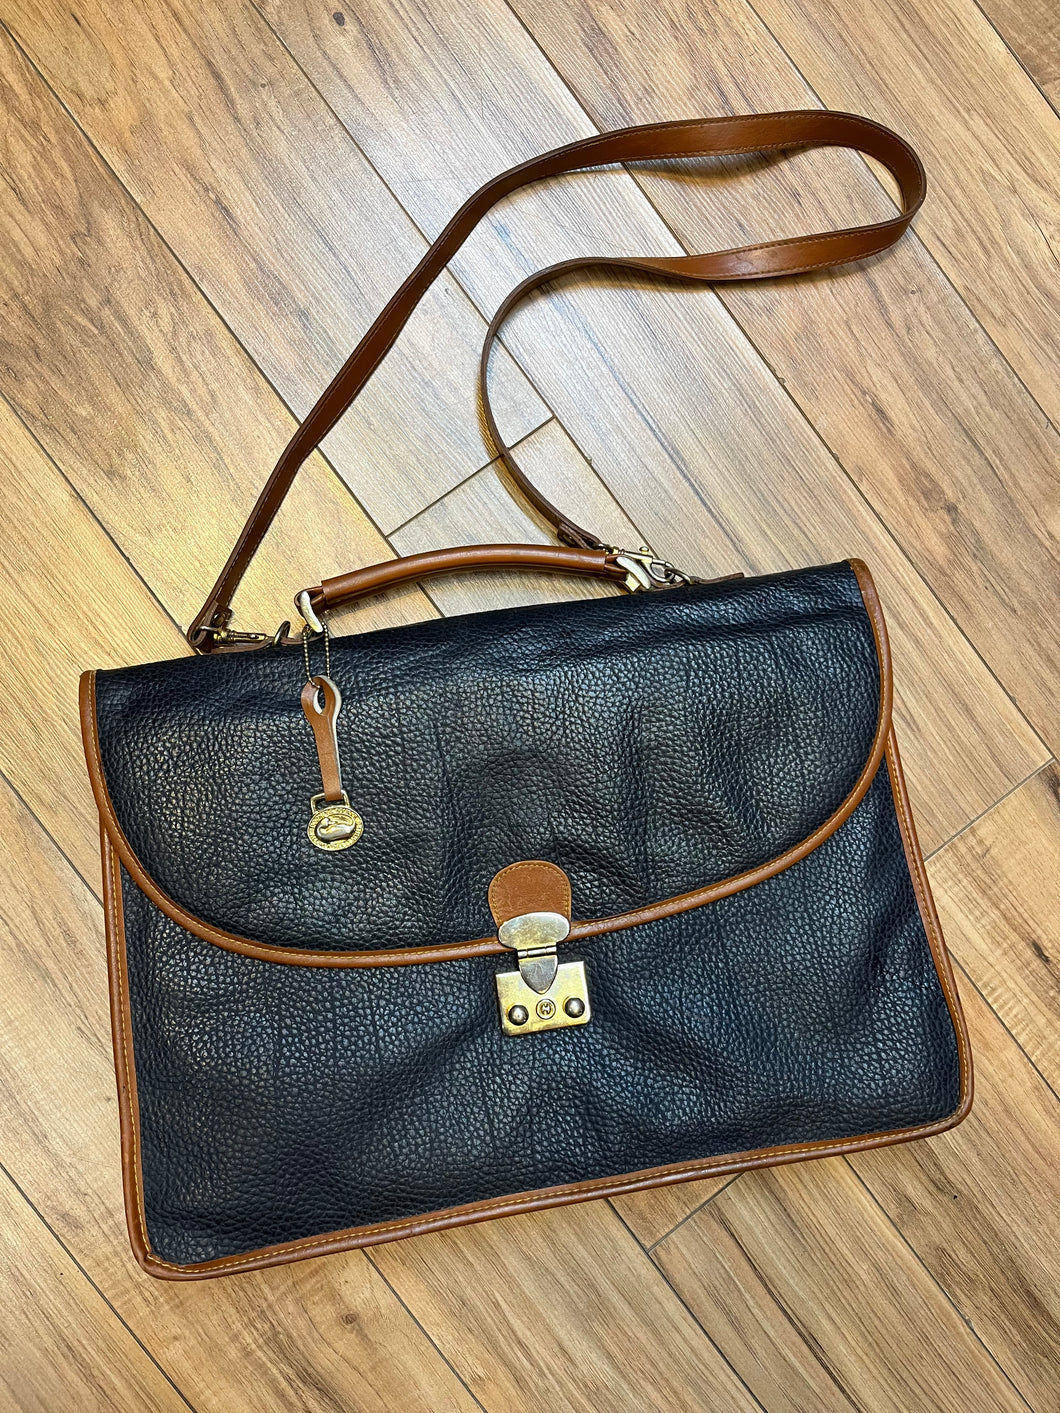 Dooney and Burke all weather leather briefcase in navy with top handle, shoulder strap and brass hardware.